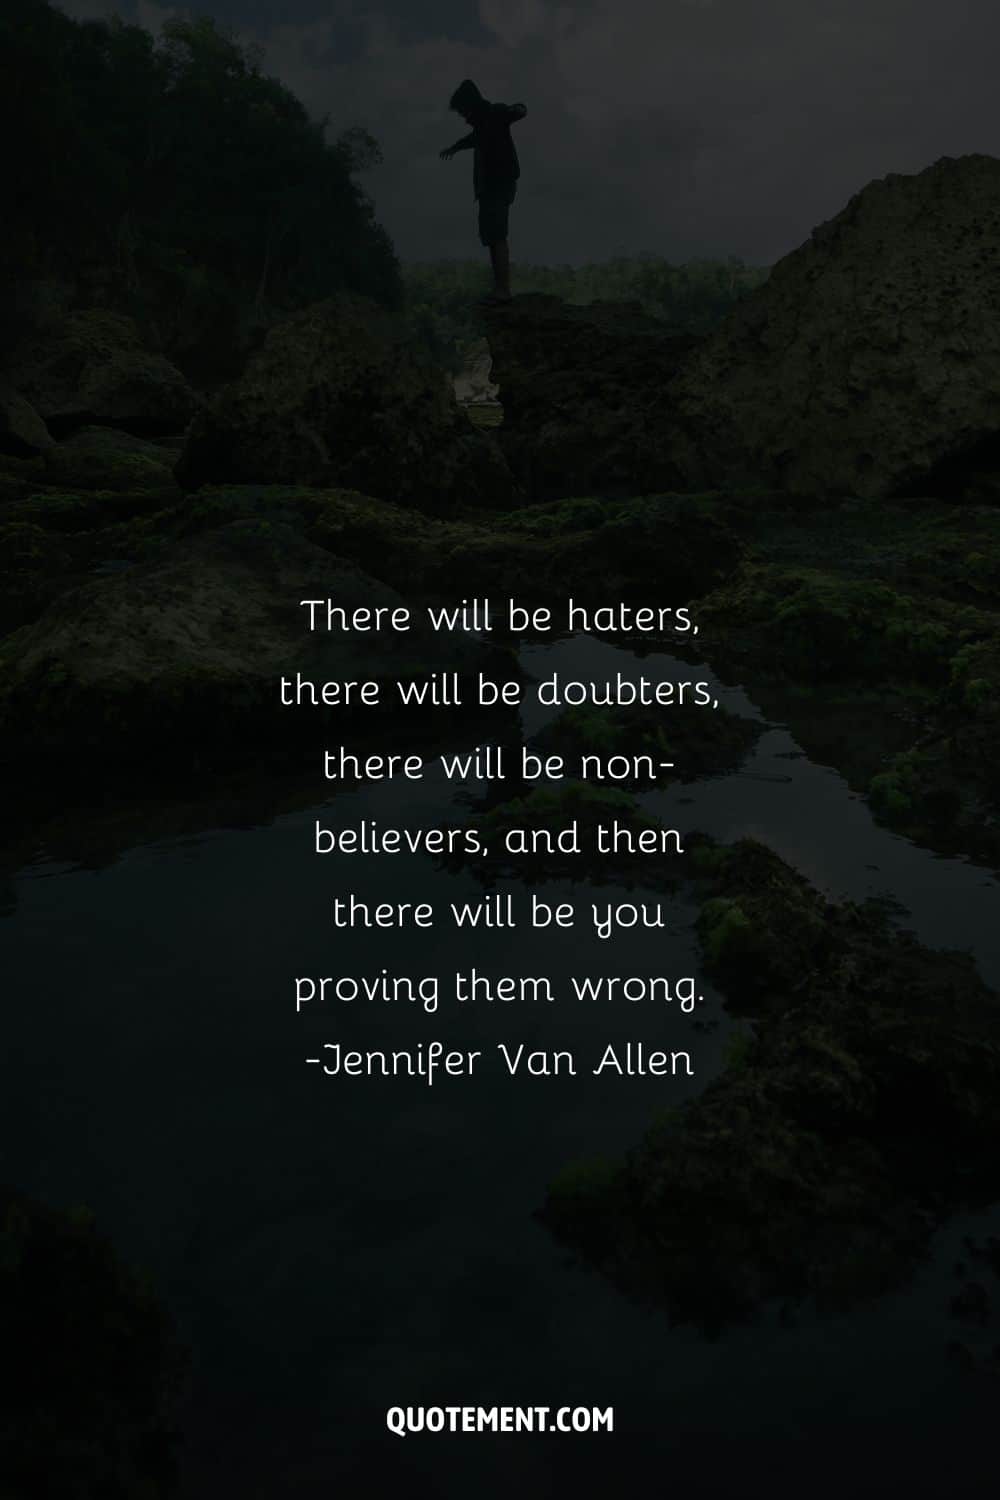 There will be haters, there will be doubters, there will be non-believers, and then there will be you proving them wrong